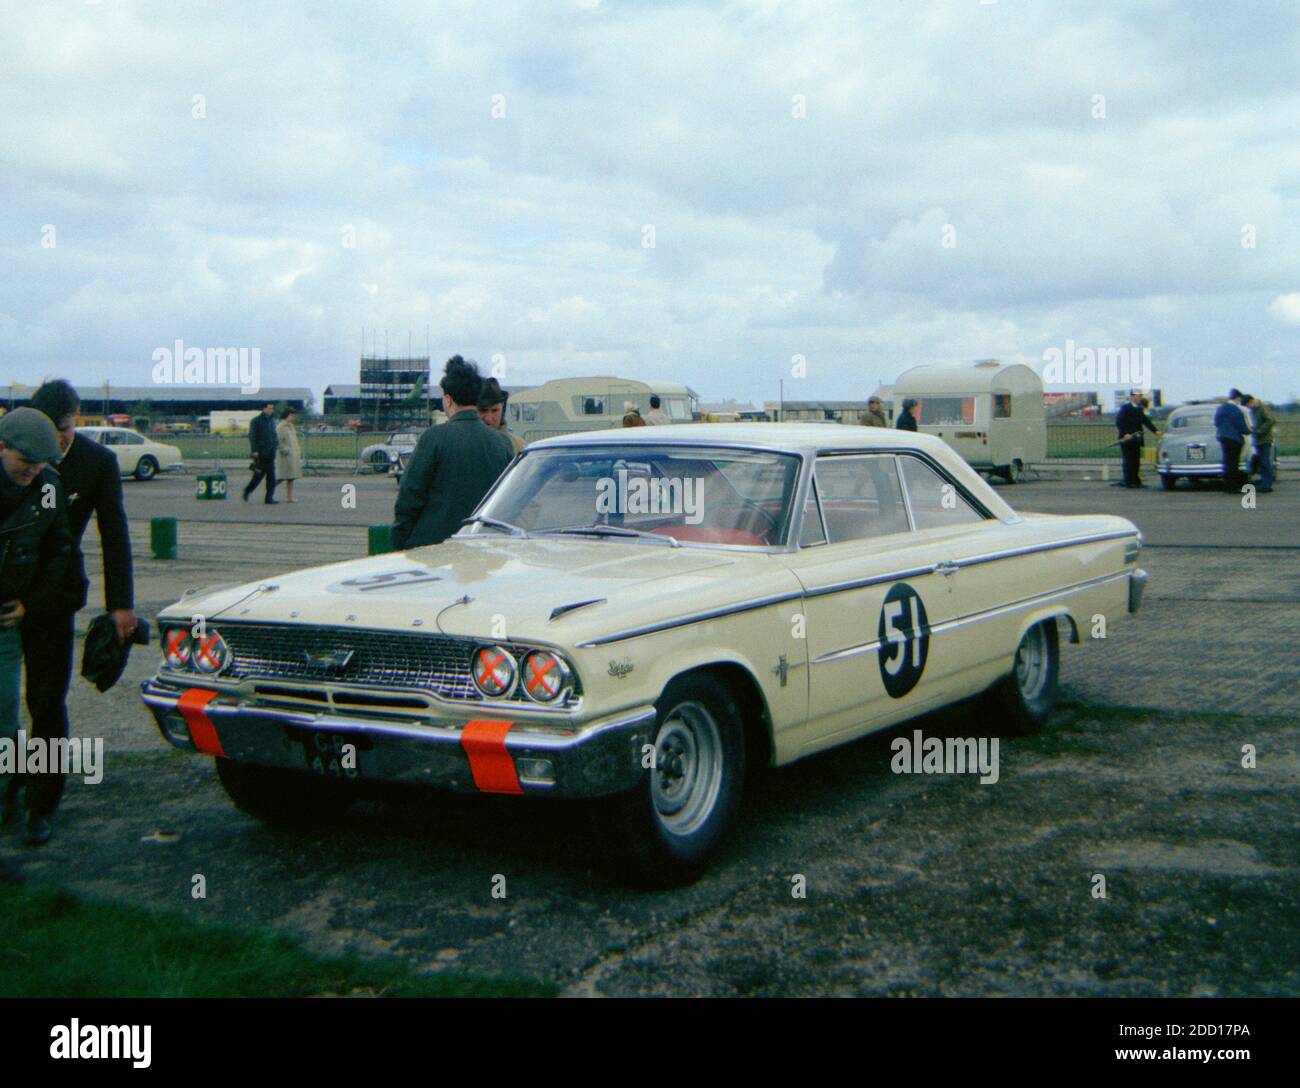 Sir Gwaine Baillie's Ford Galaxie in the paddock at Silverstone before the start of Practise for the Saloon Car Race at the BRDC event 1st May 1964 Stock Photo